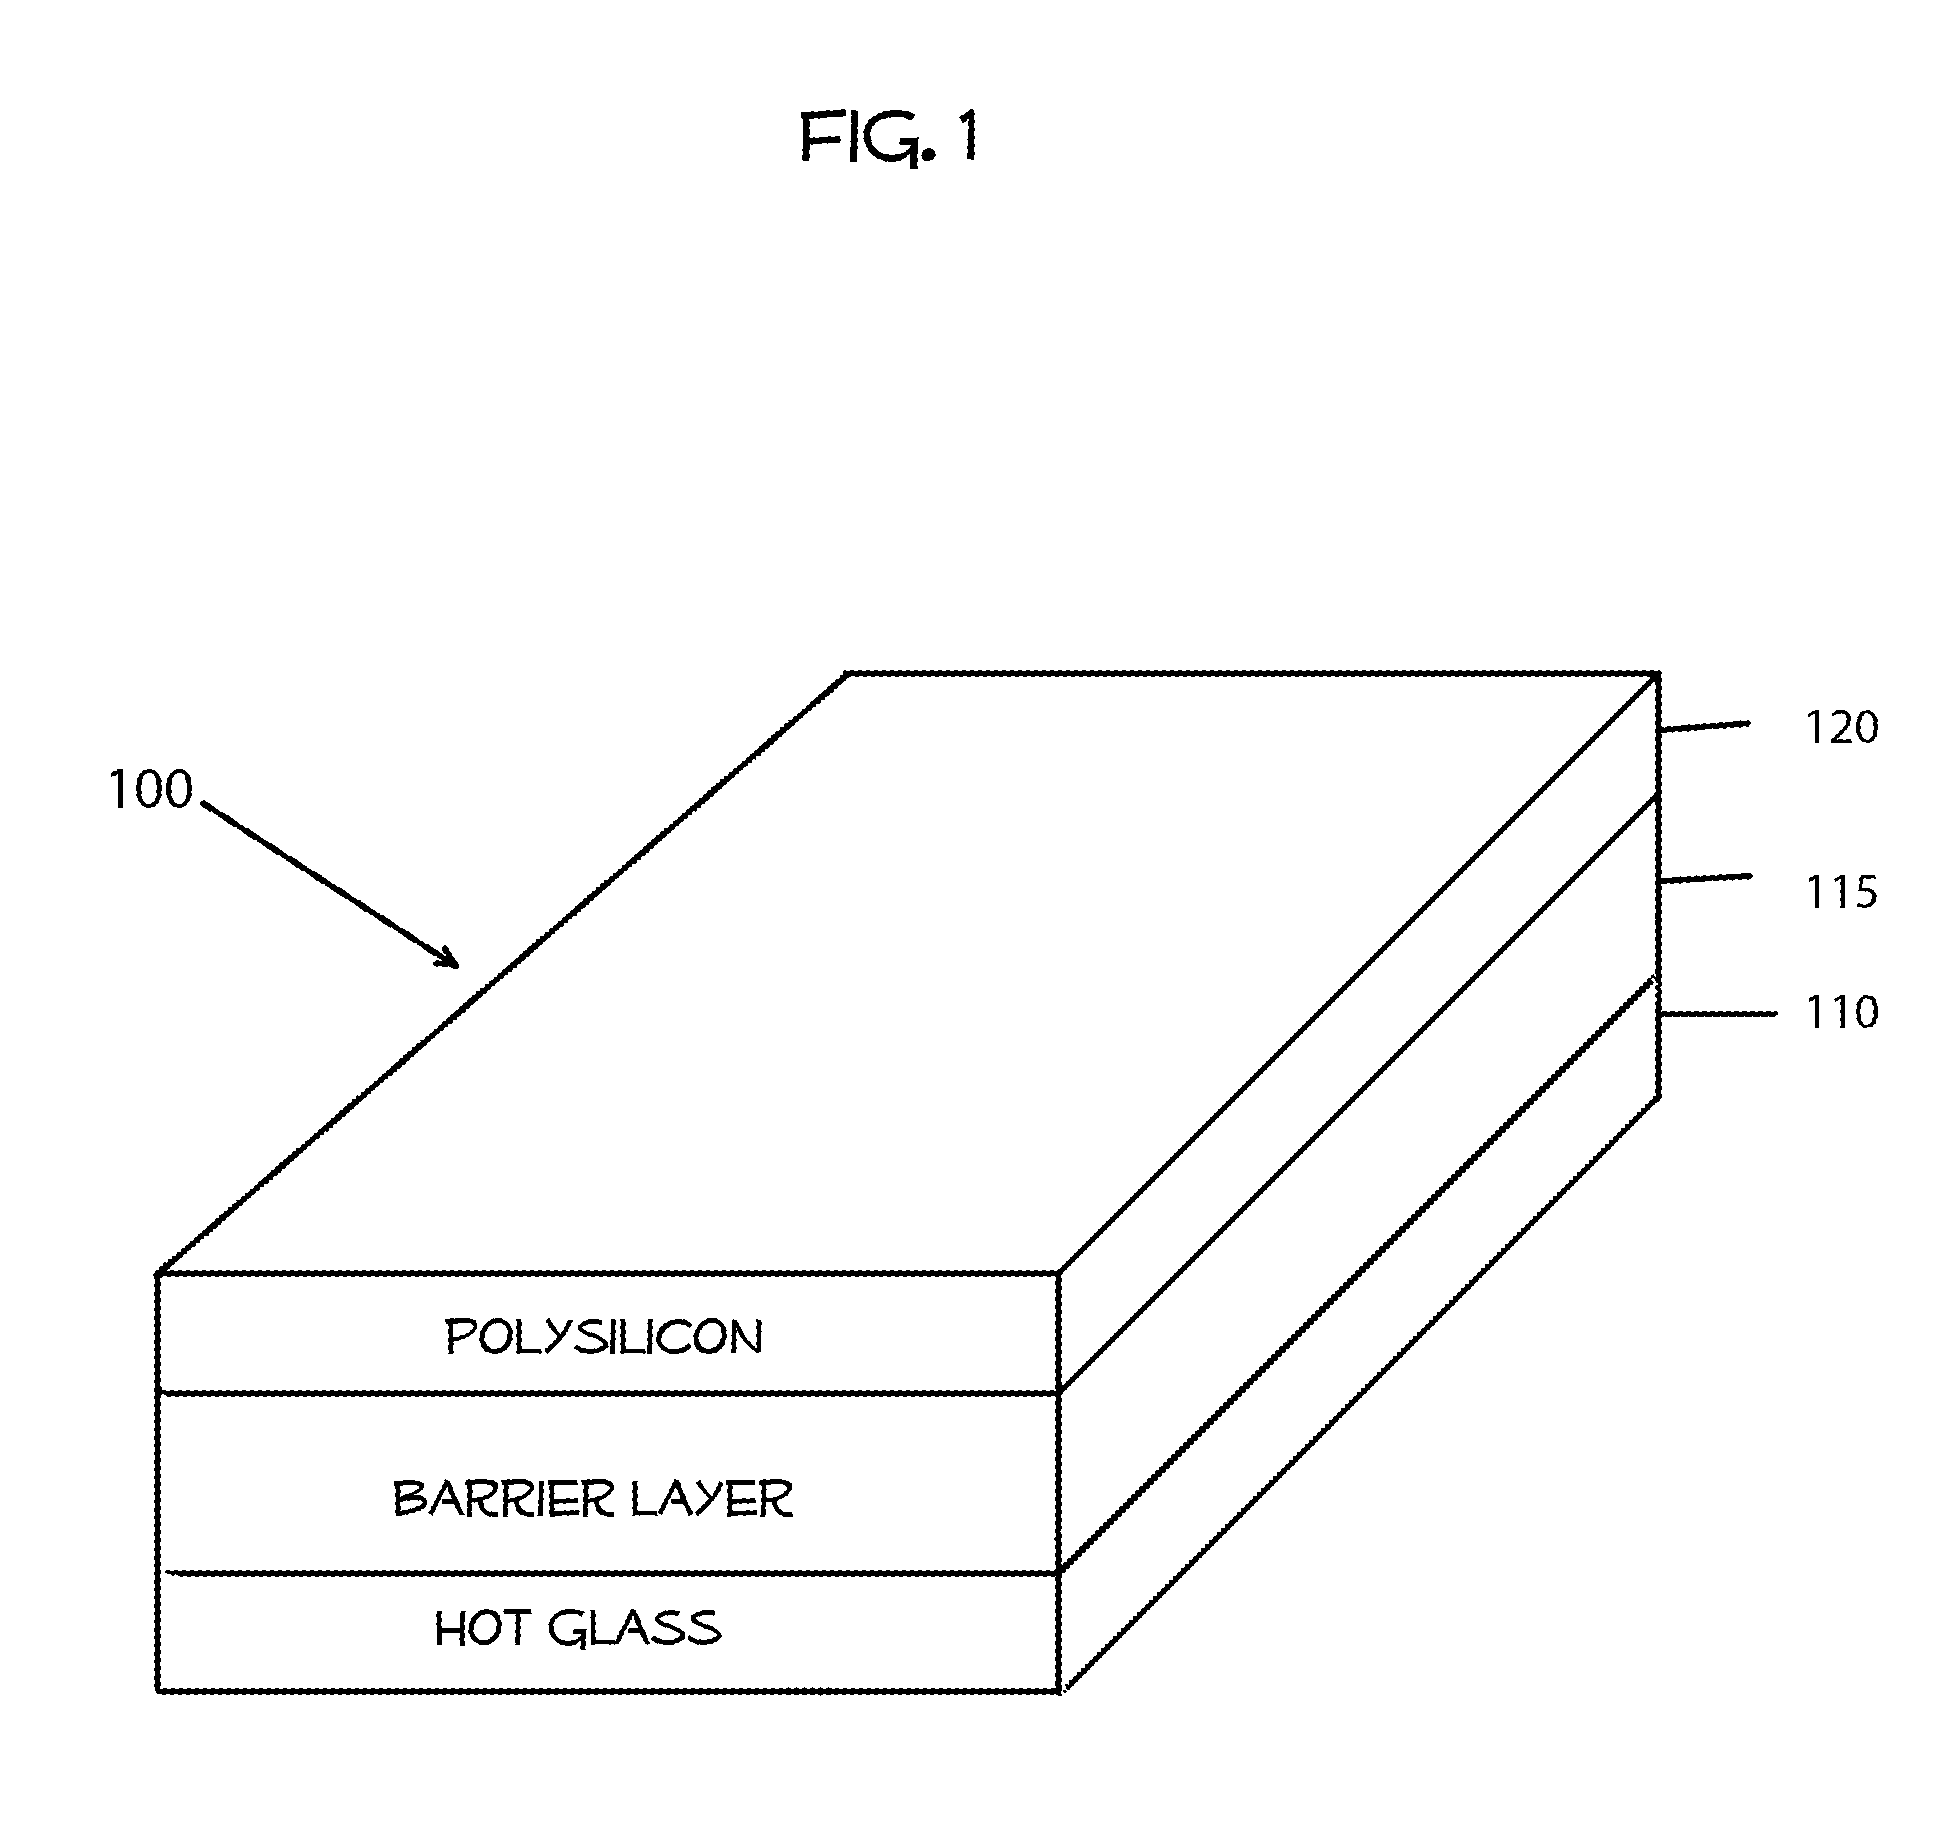 Method for producing high temperature thin film silicon layer on glass